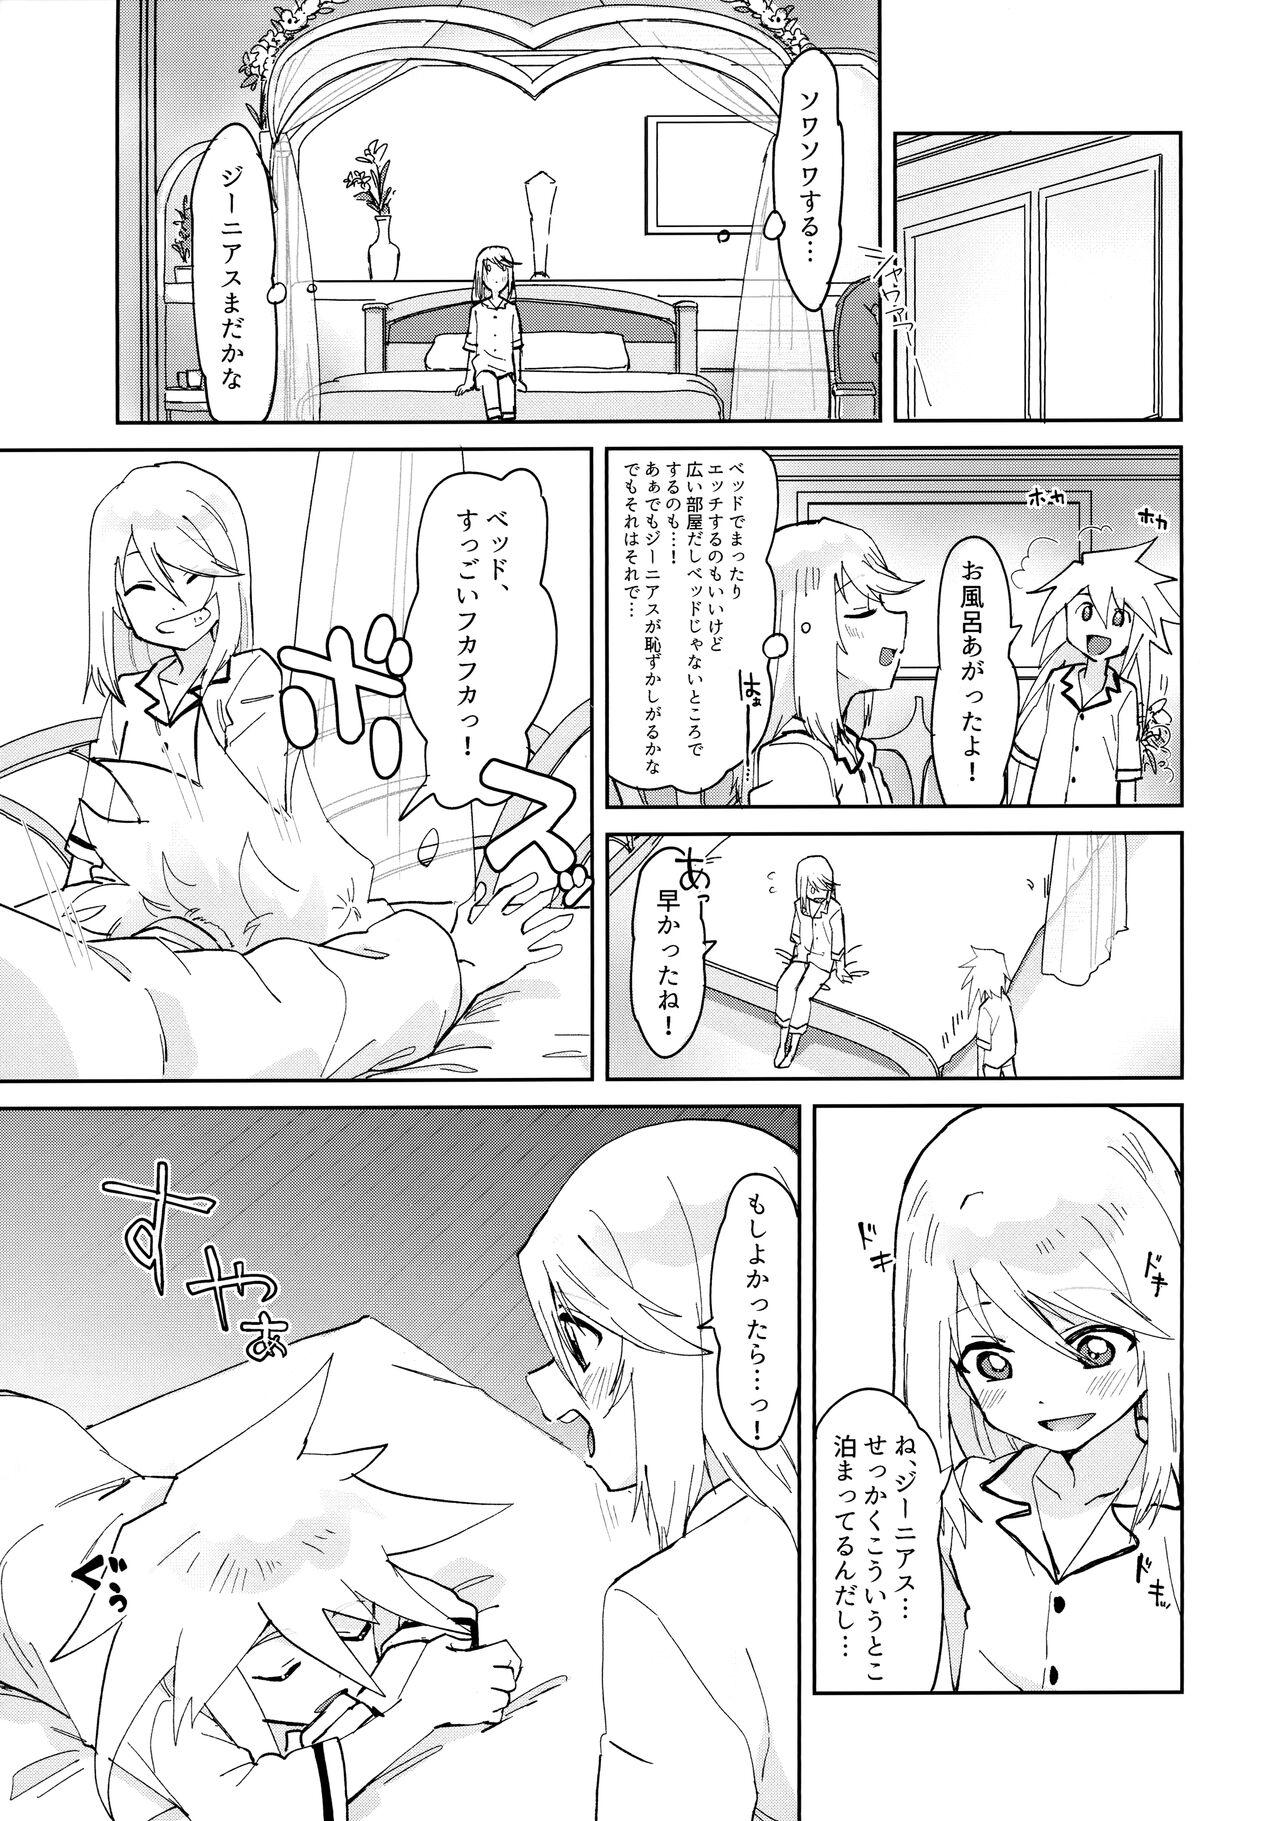 Piroca Tropical in Altamira - Tales of symphonia Amature Sex - Page 6